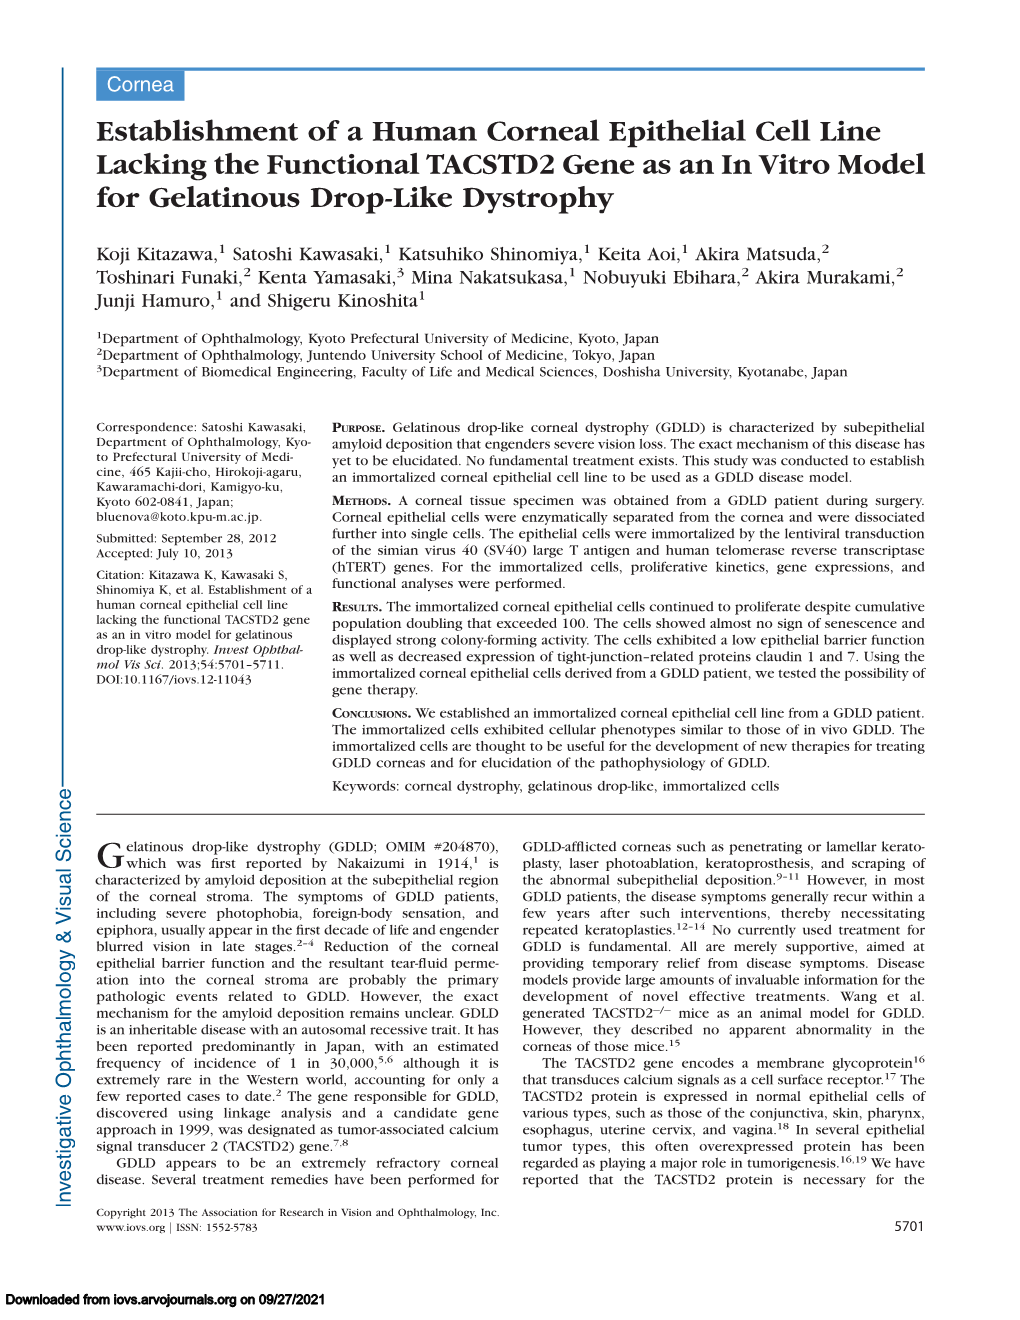 Establishment of a Human Corneal Epithelial Cell Line Lacking the Functional TACSTD2 Gene As an in Vitro Model for Gelatinous Drop-Like Dystrophy